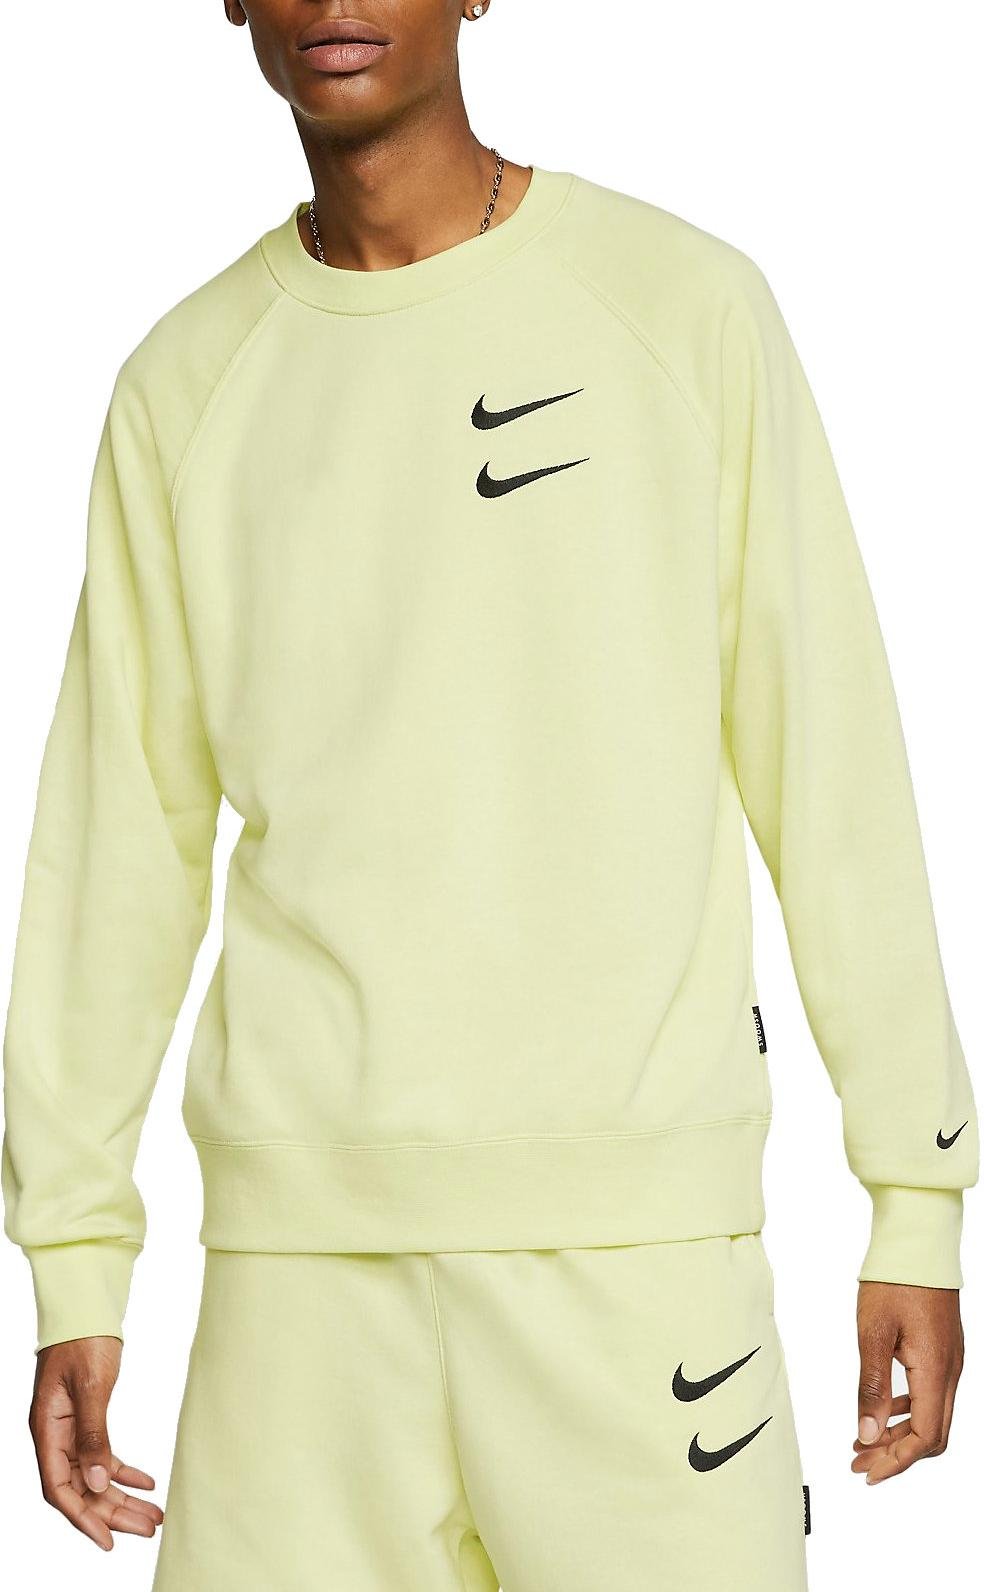 constructor permanecer Aprovechar Sudadera Nike M NSW SWOOSH CREW FT - Top4Fitness.es